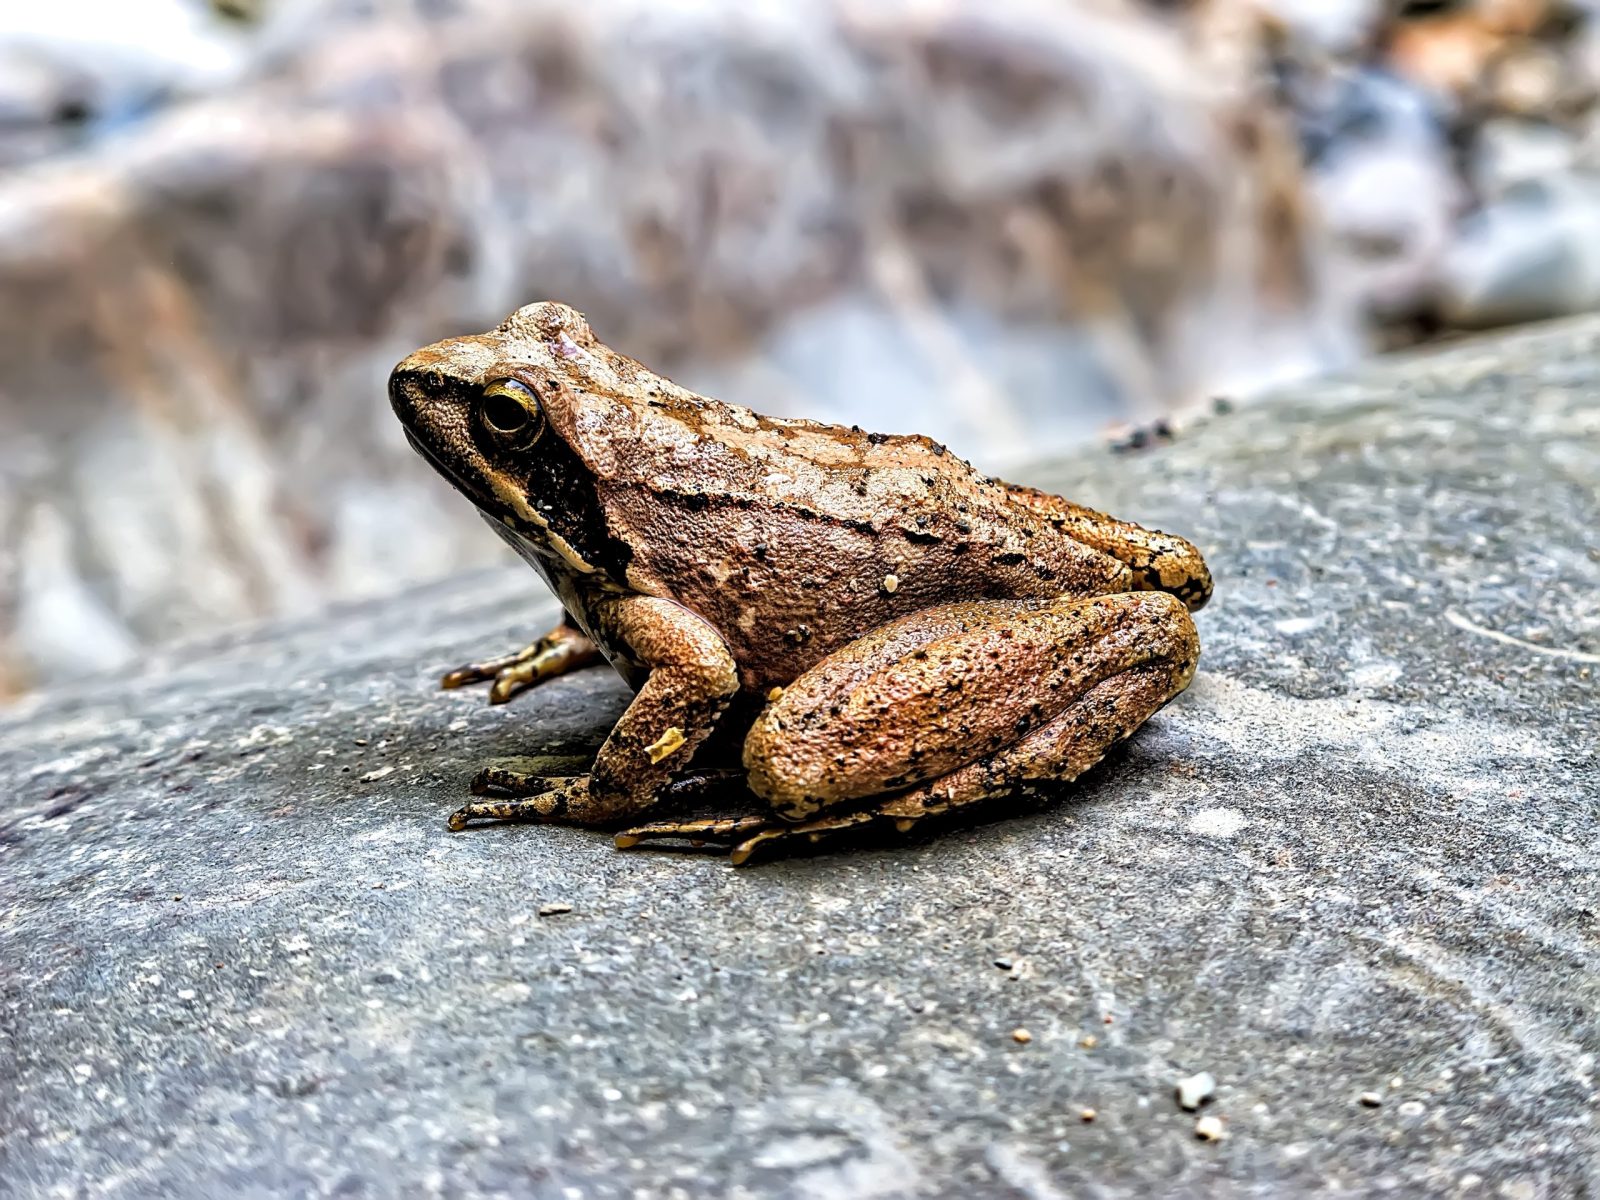 Frog on a rock